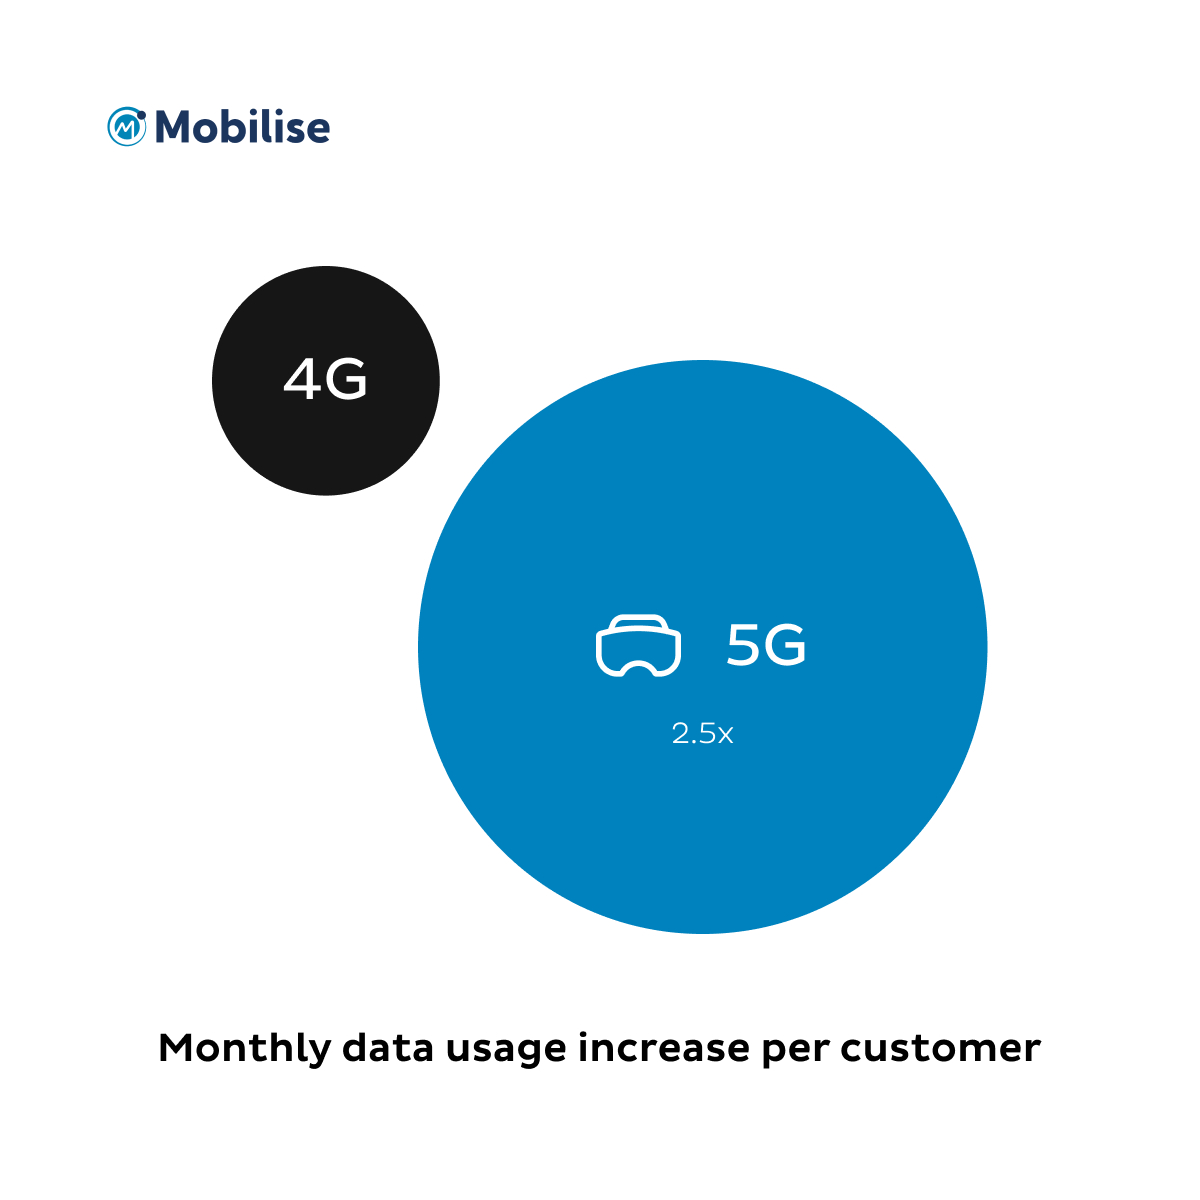 Infographic showing the comparison of 4G and 5G individual energy consumption